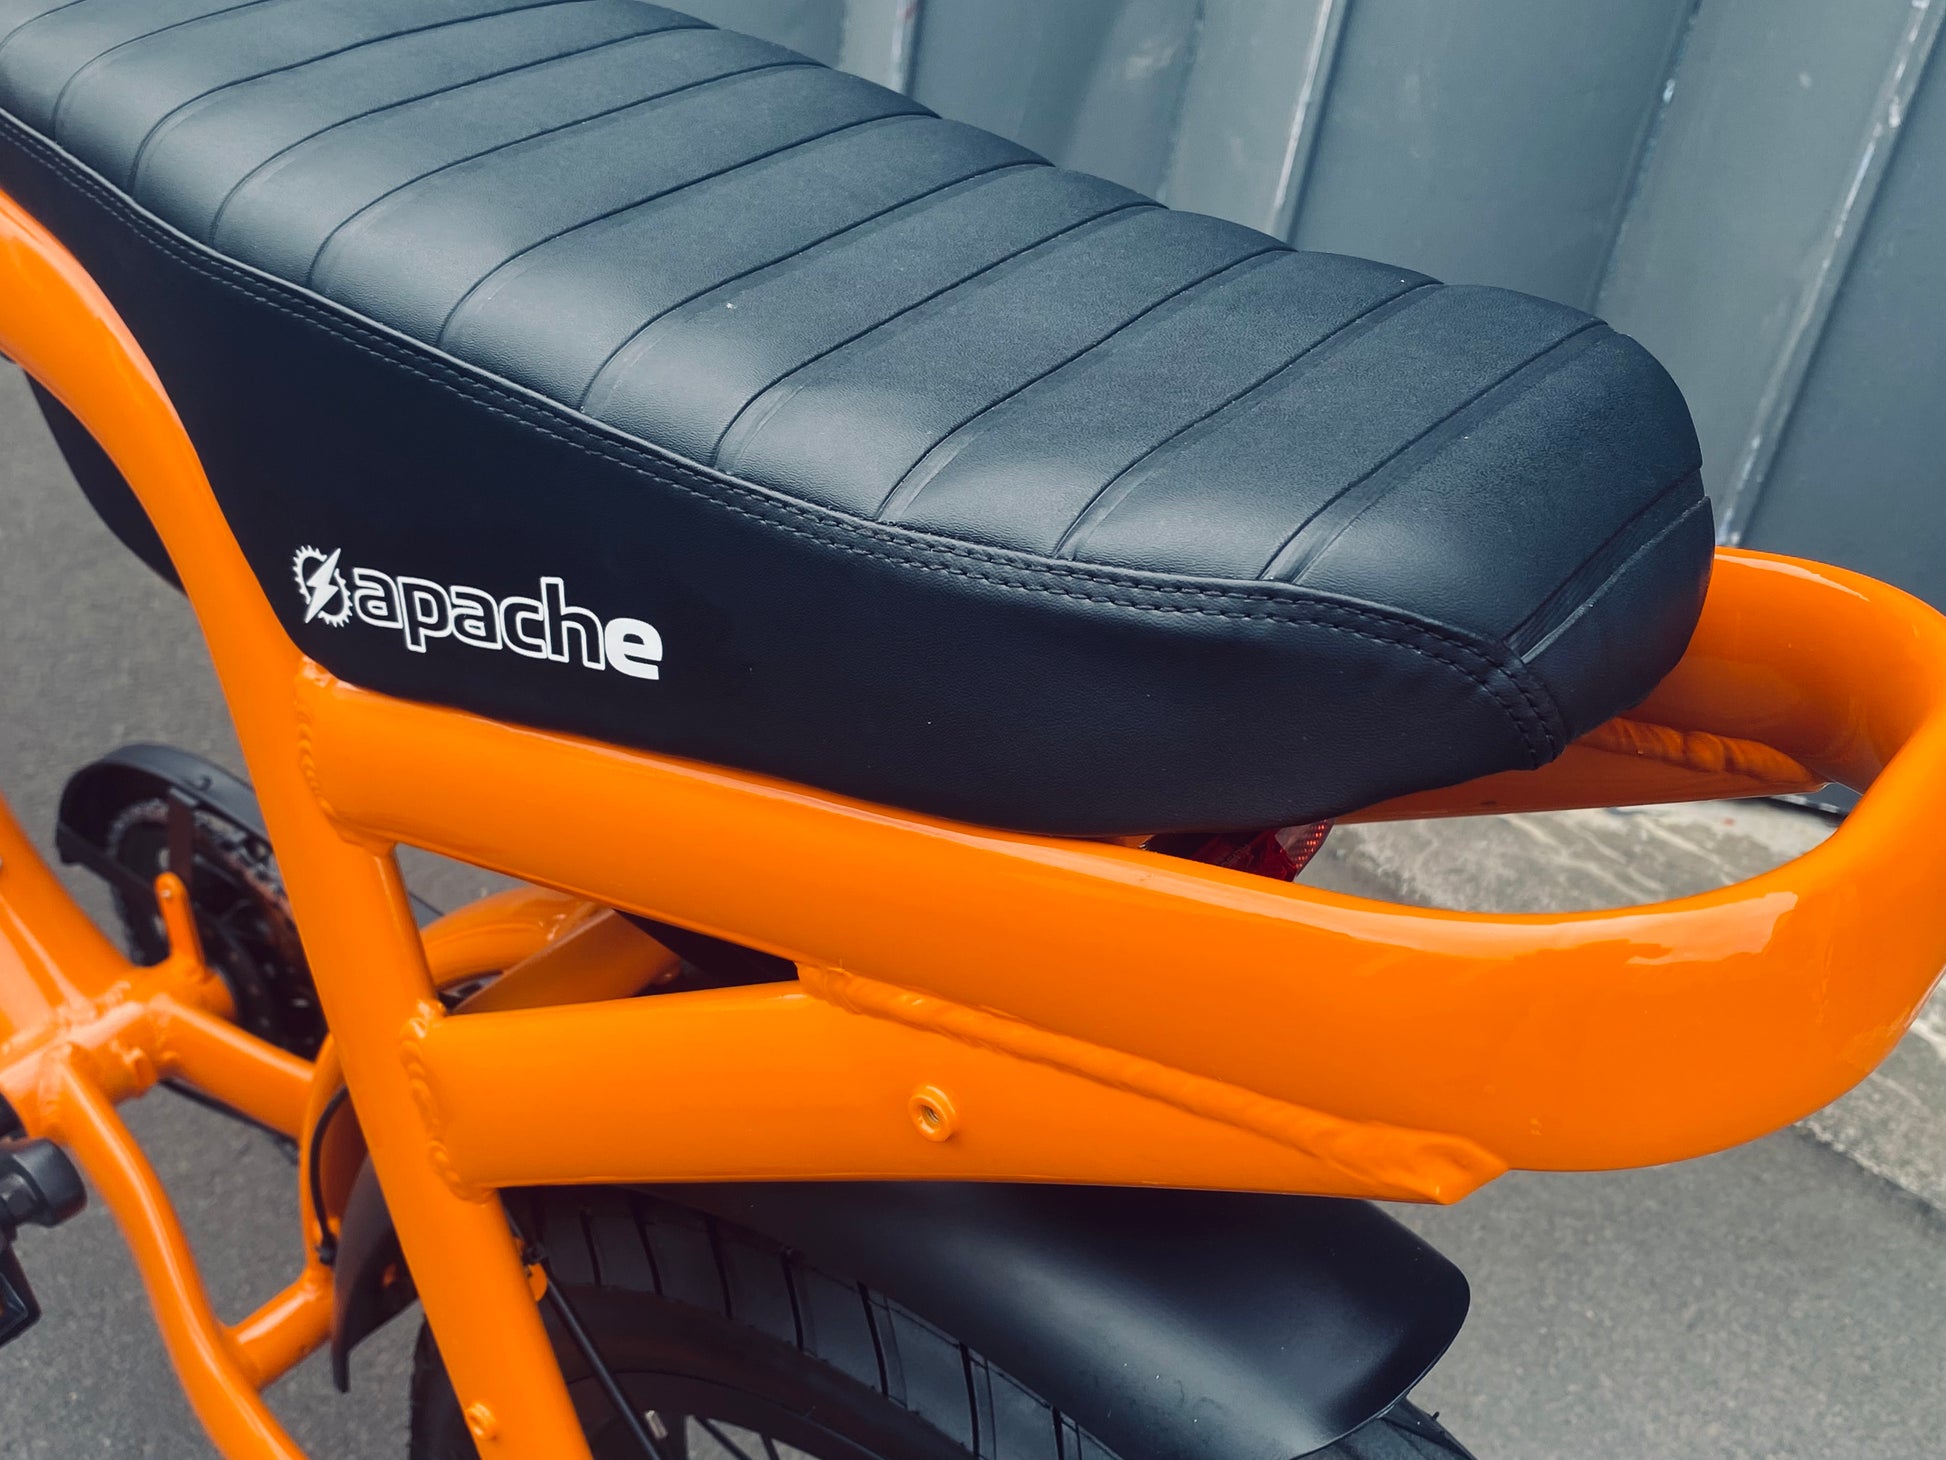 The Apache Electric Bike  combines a great look, Chopper style seat with a comfortable riding position with quality components and manufacturing. From Boostbikes 